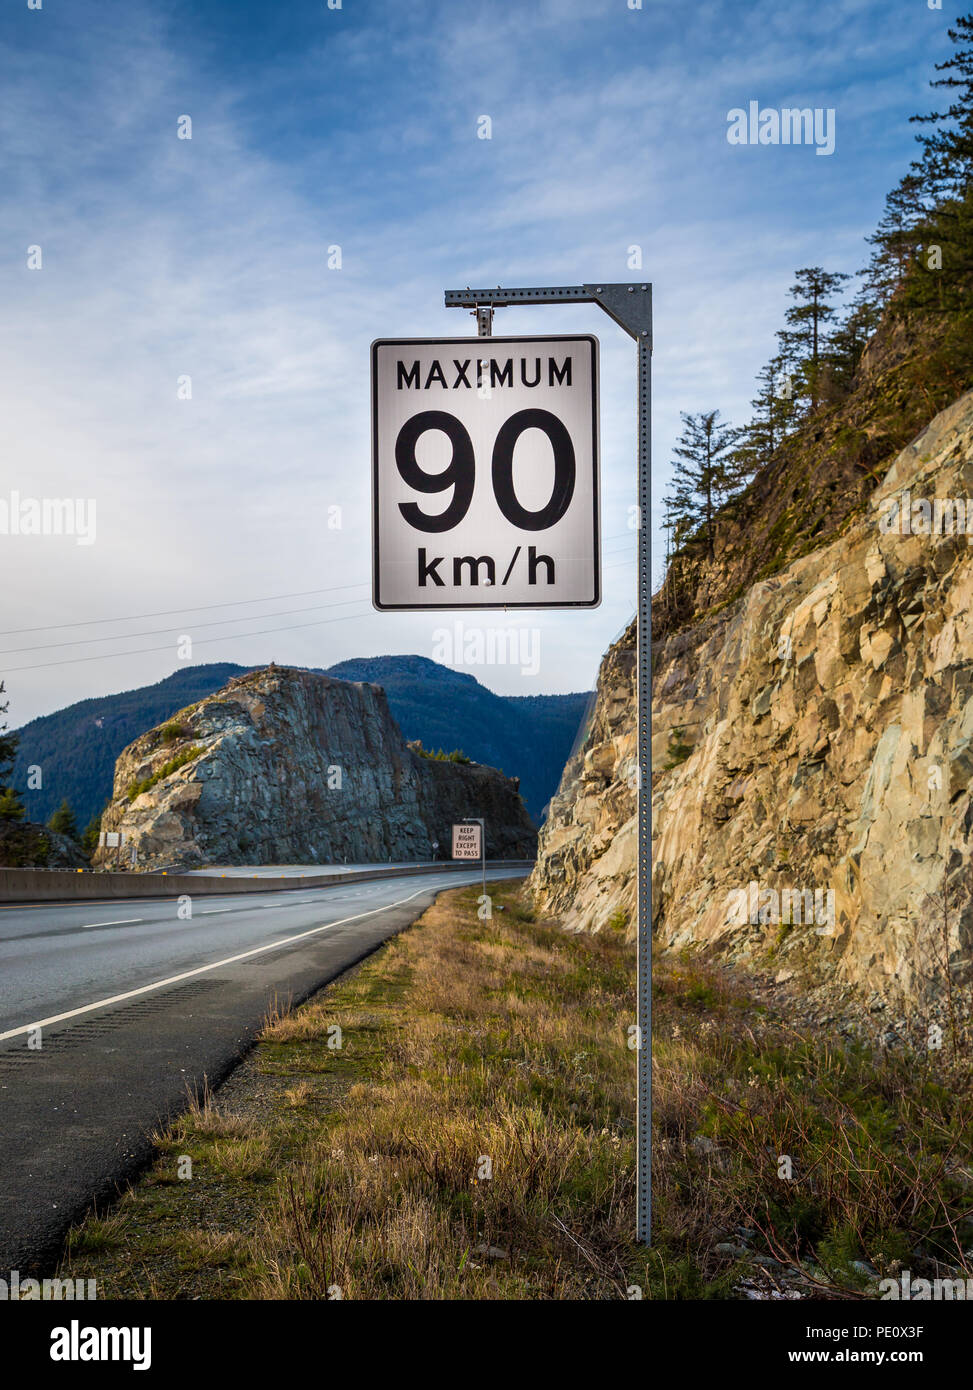 Speed limit sign with a keep right sign in the background beside a mountain highway. Stock Photo